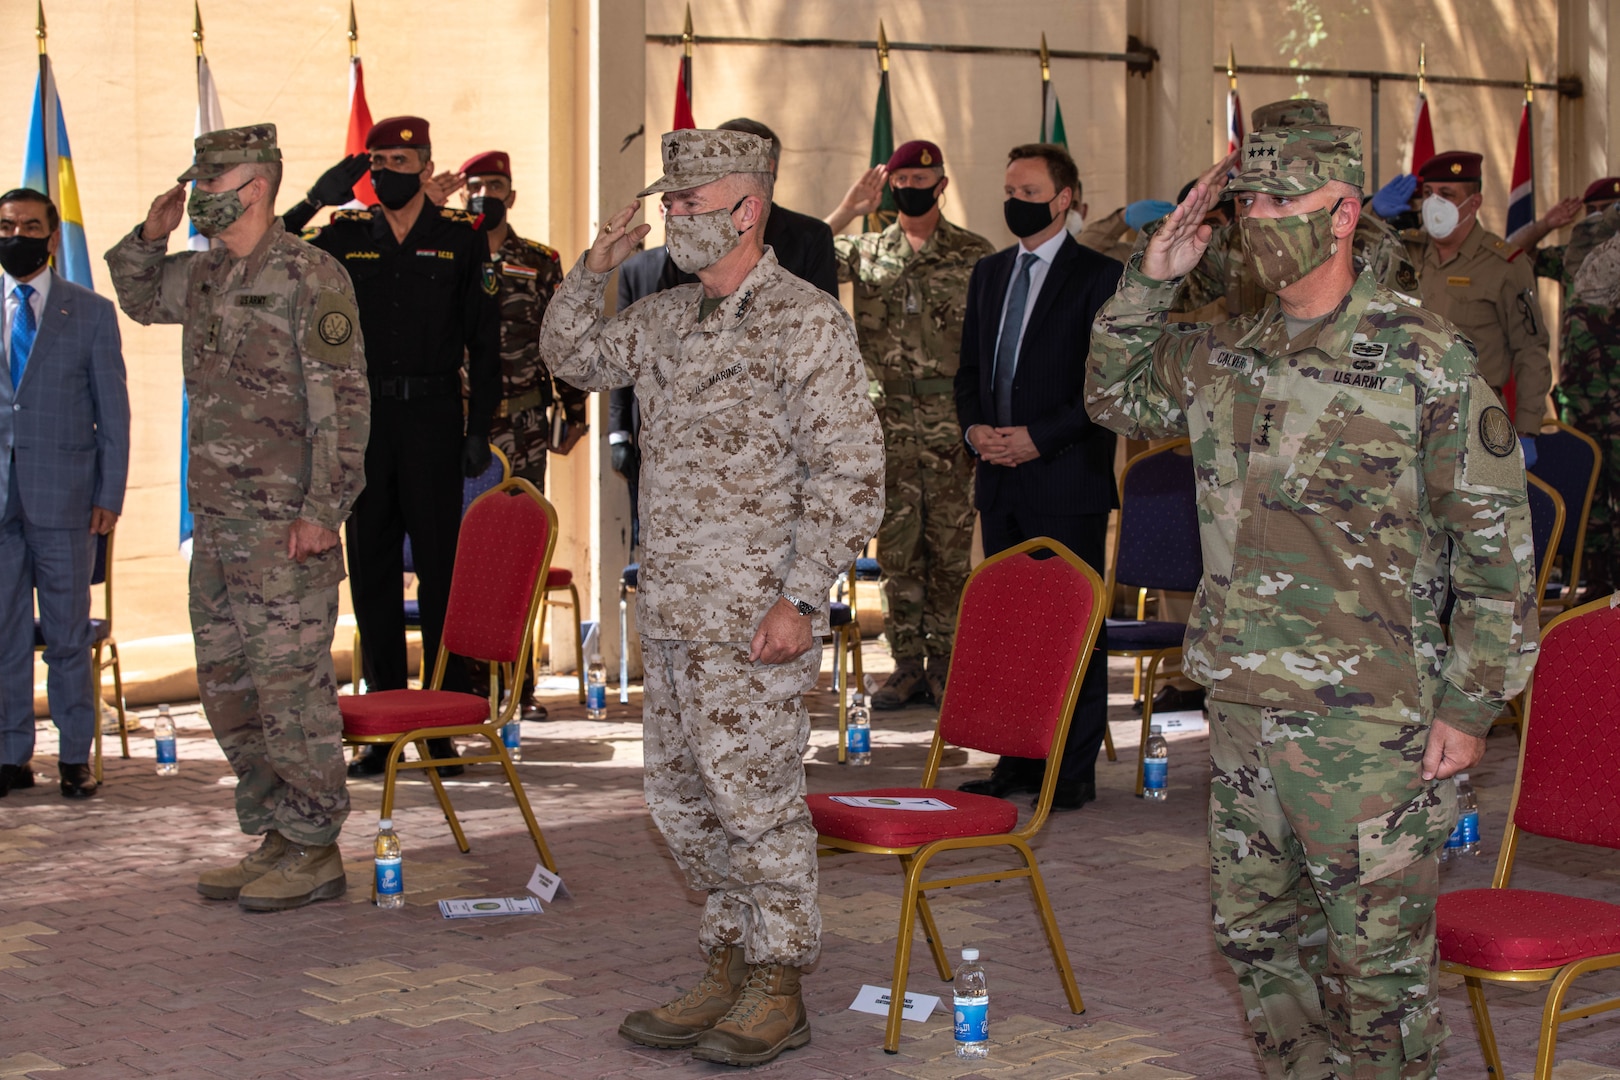 Combined Joint Task Force-Operation Inherent Resolve, the military organization to defeat Daesh in Iraq and Syria, swapped leaders during a change of command ceremony in Baghdad, Set. 9, 2020.
Lt. Gen. Paul Calvert (right), Gen. Kenneth F. McKenzie Jr. (central), commanding general, U.S. Central Command, and Lt. Gen. Pat White (left), III Armored Corps commanding general, salute during a ceremony to welcome Gen. Calvert as the new CJTF-OIR commander.